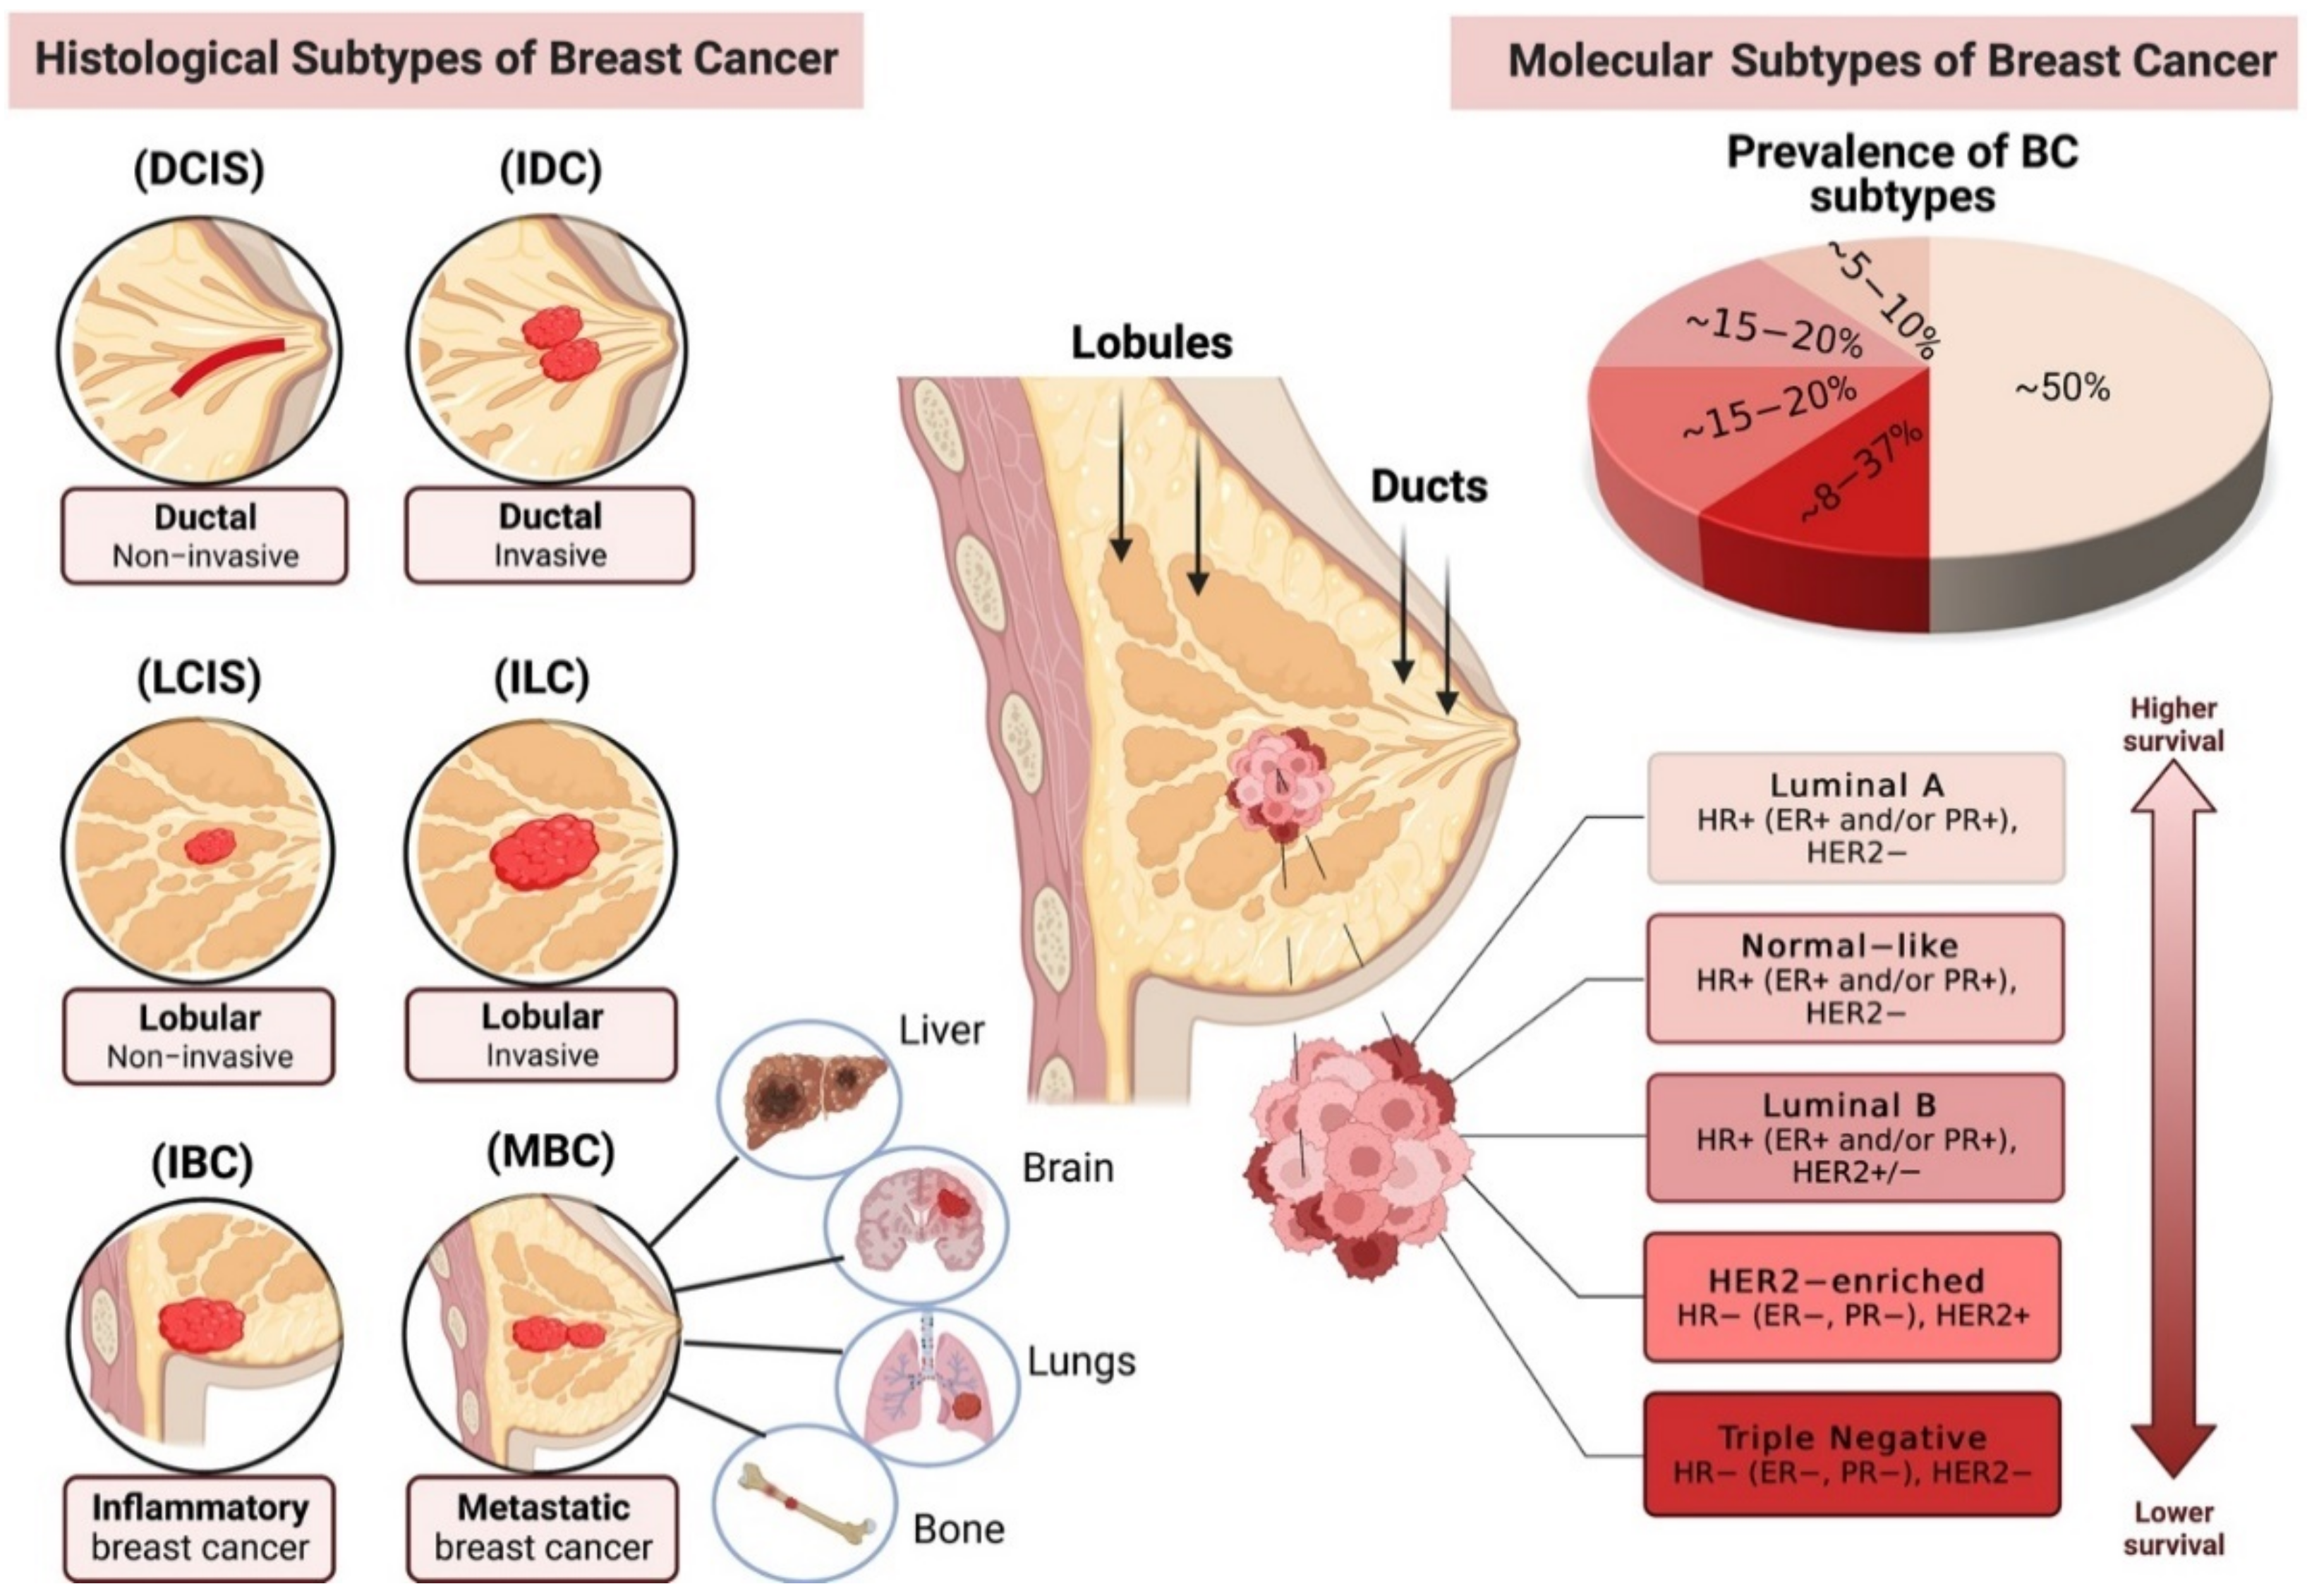 Characteristics of the molecular subtypes of breast cancer. Breast